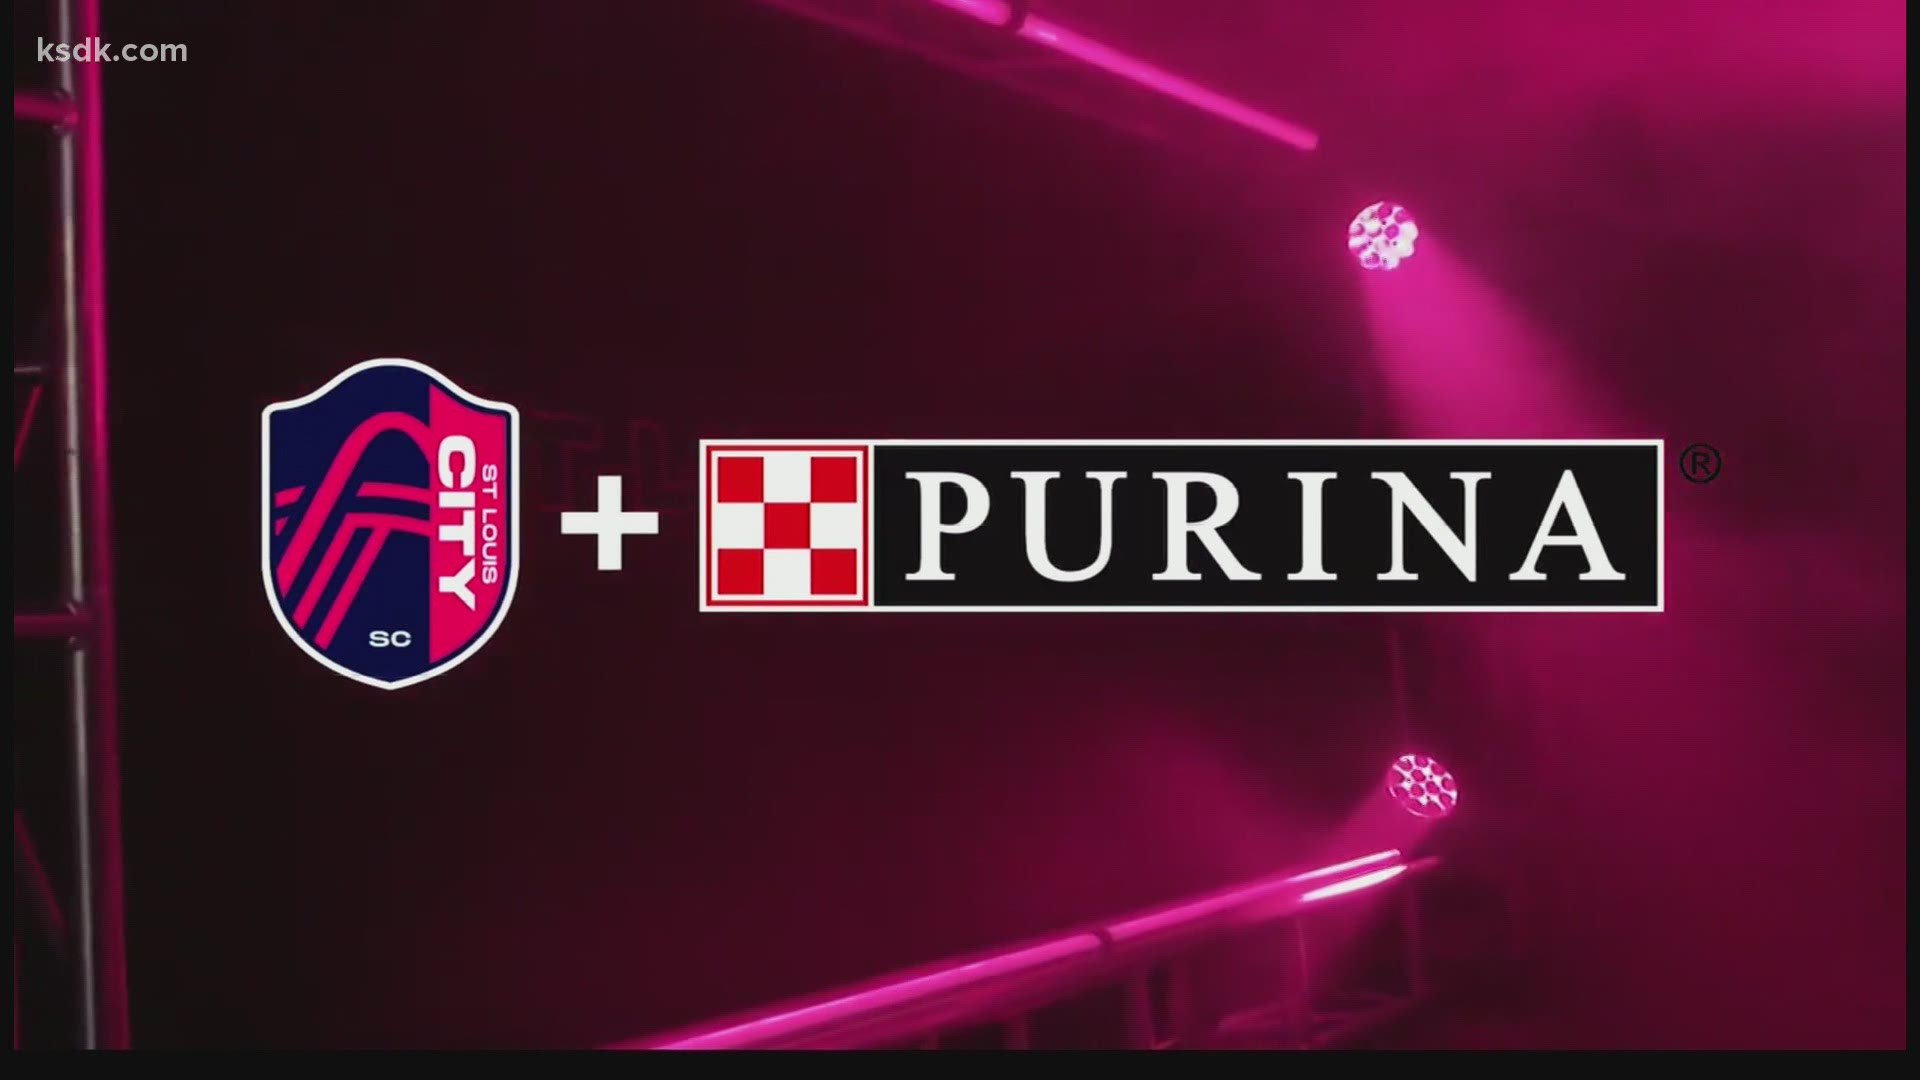 The Purina logo will also show up on the team's kits.